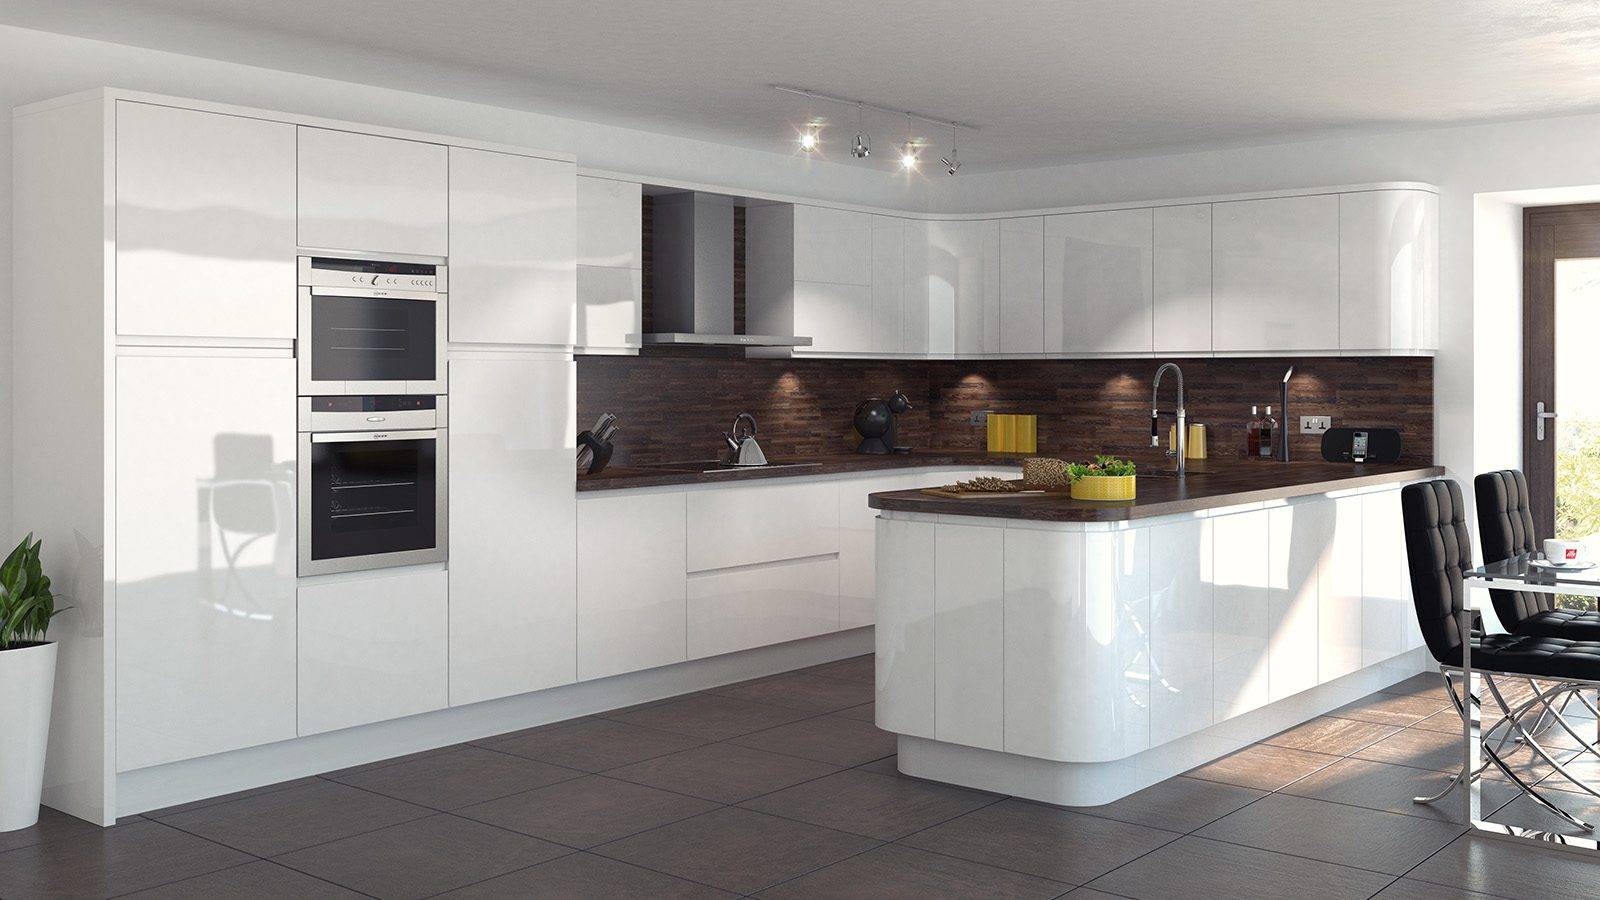 In Line Gloss White | Net Kitchens, Walthamstow